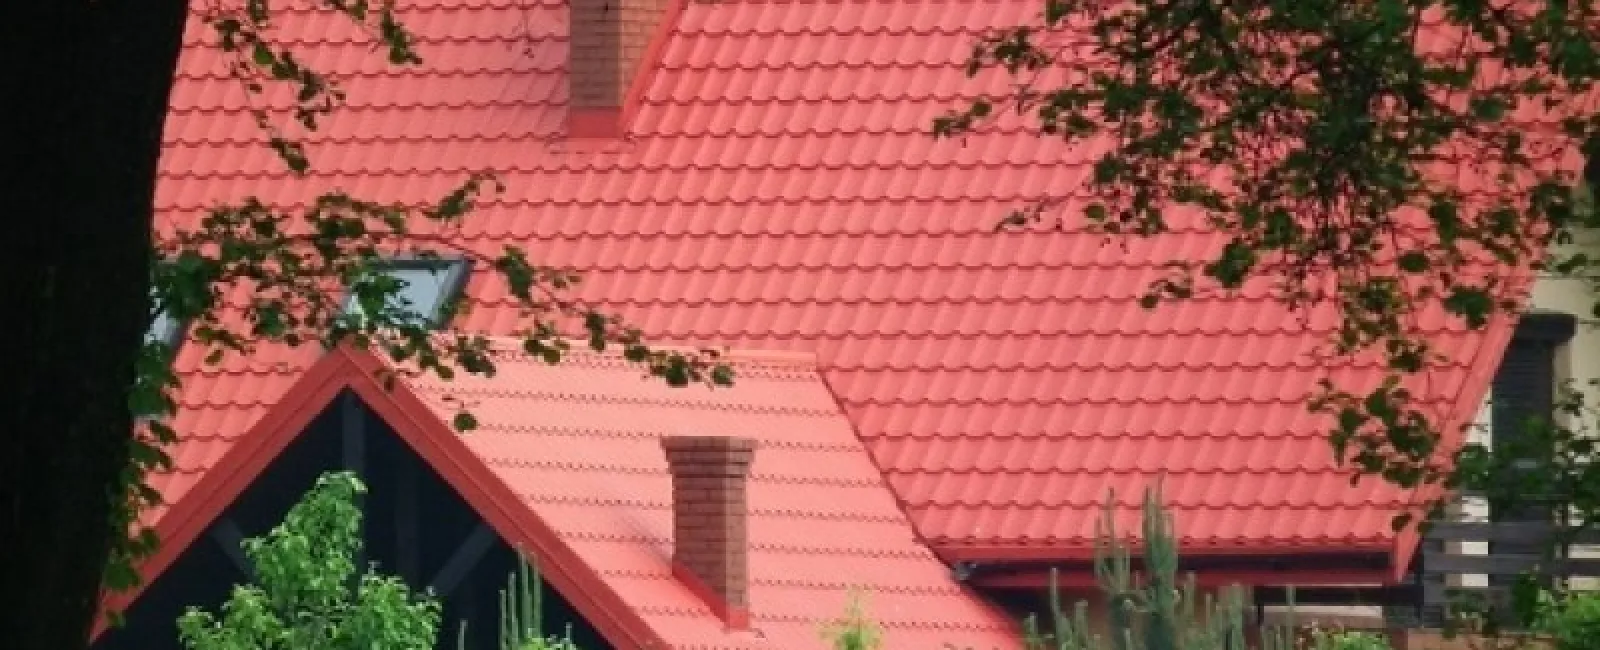 Metal Roofing: Here are your many options